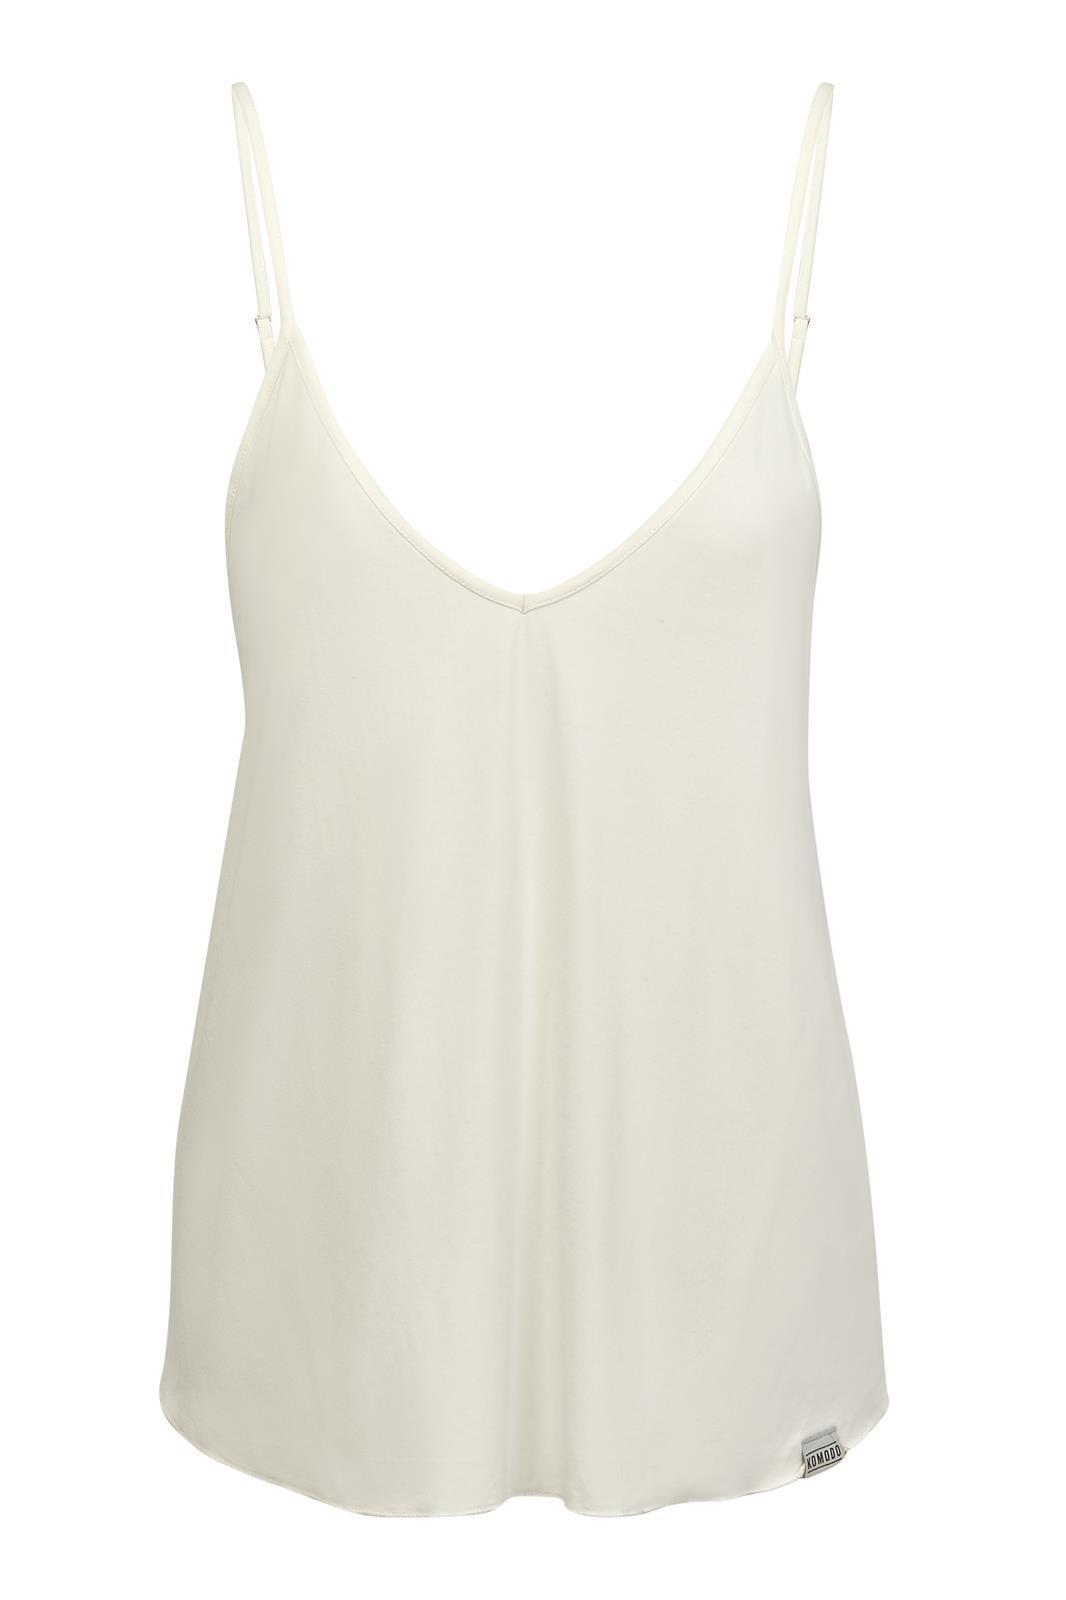 Camisole Top Modell: Mandy